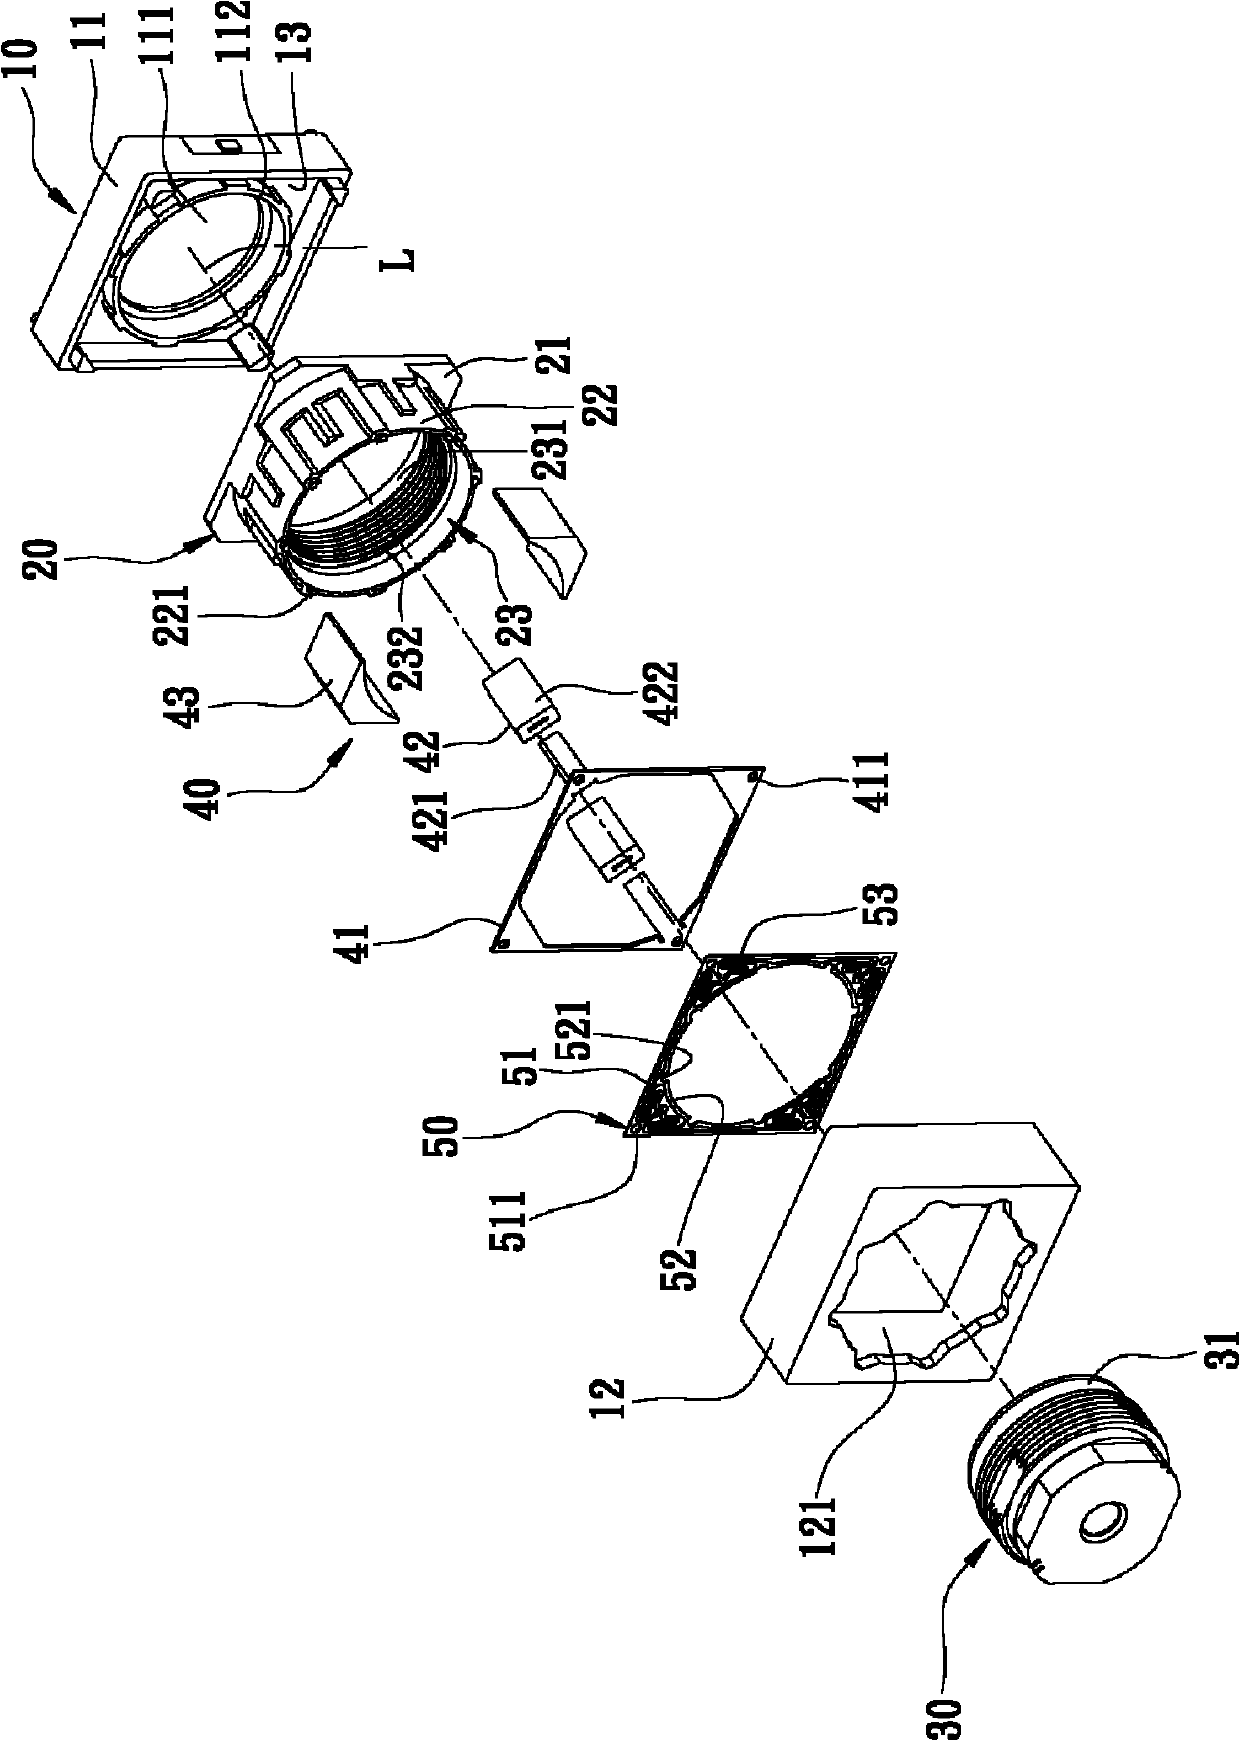 Lens module capable of switching focuses